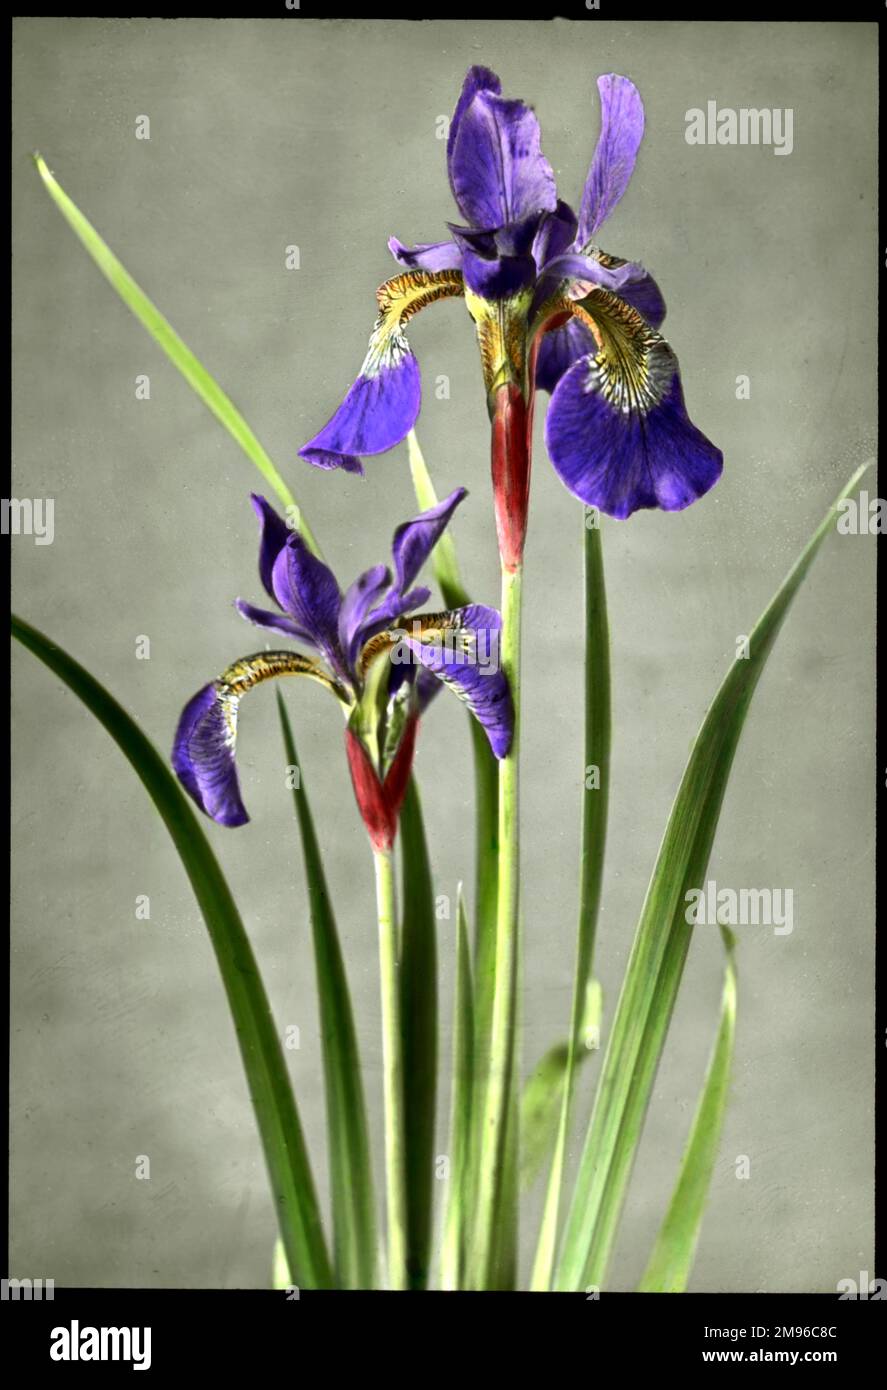 Iris Orientalis (Spuria Beardless Iris), a flowering perennial of the Iridaceae family, with purple flowers (this species also has yellow or cream-coloured flowers). Stock Photo